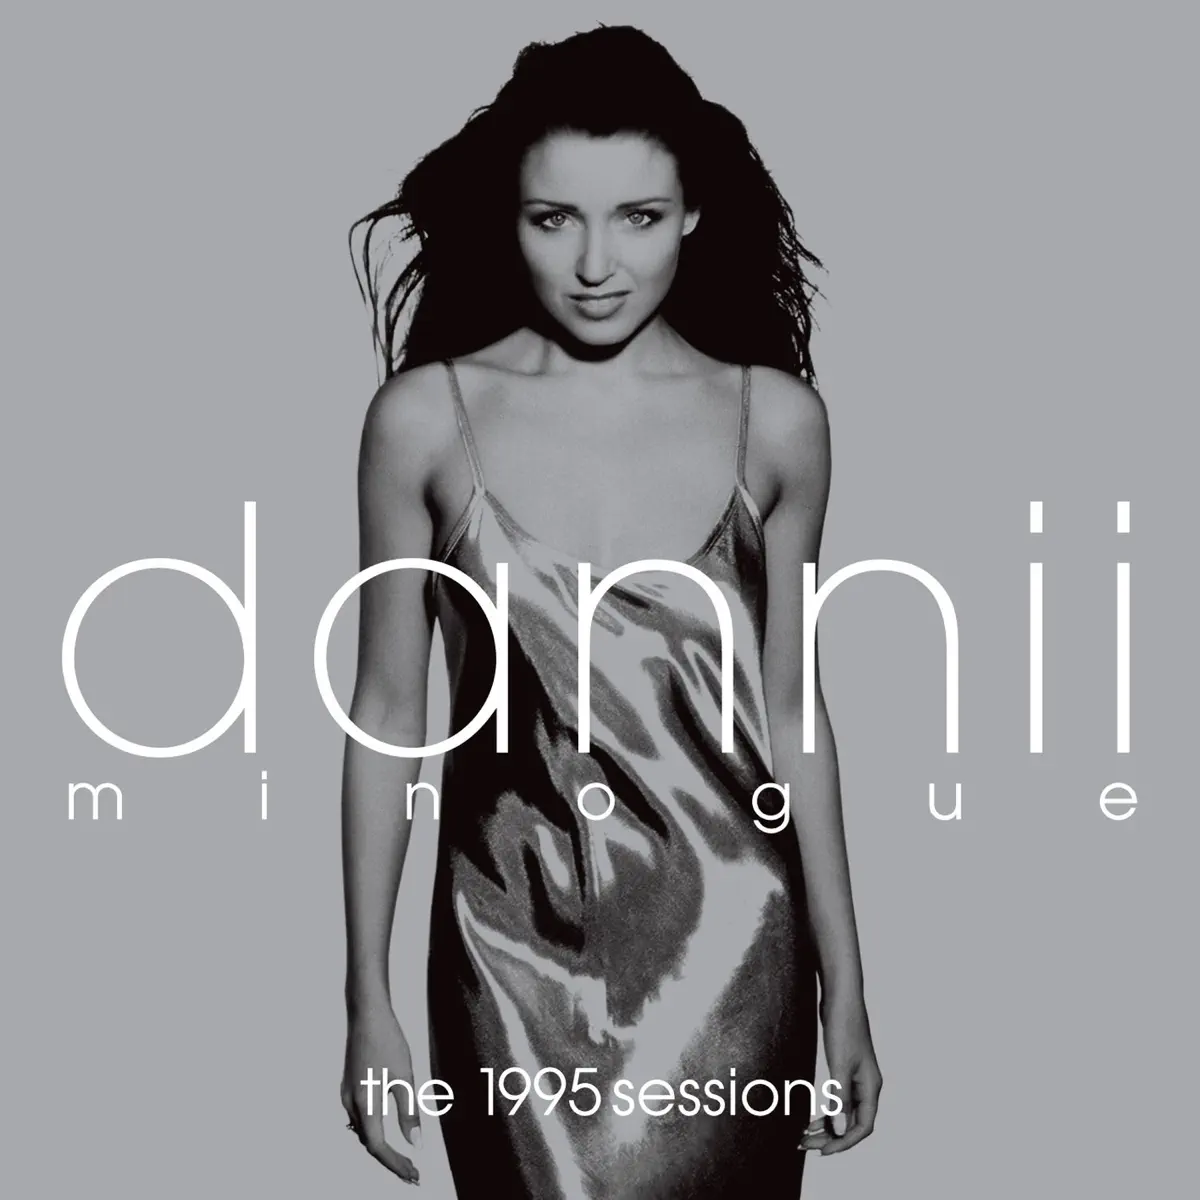 Dannii Minogue - The 1995 Sessions (2009) [iTunes Plus AAC M4A]-新房子